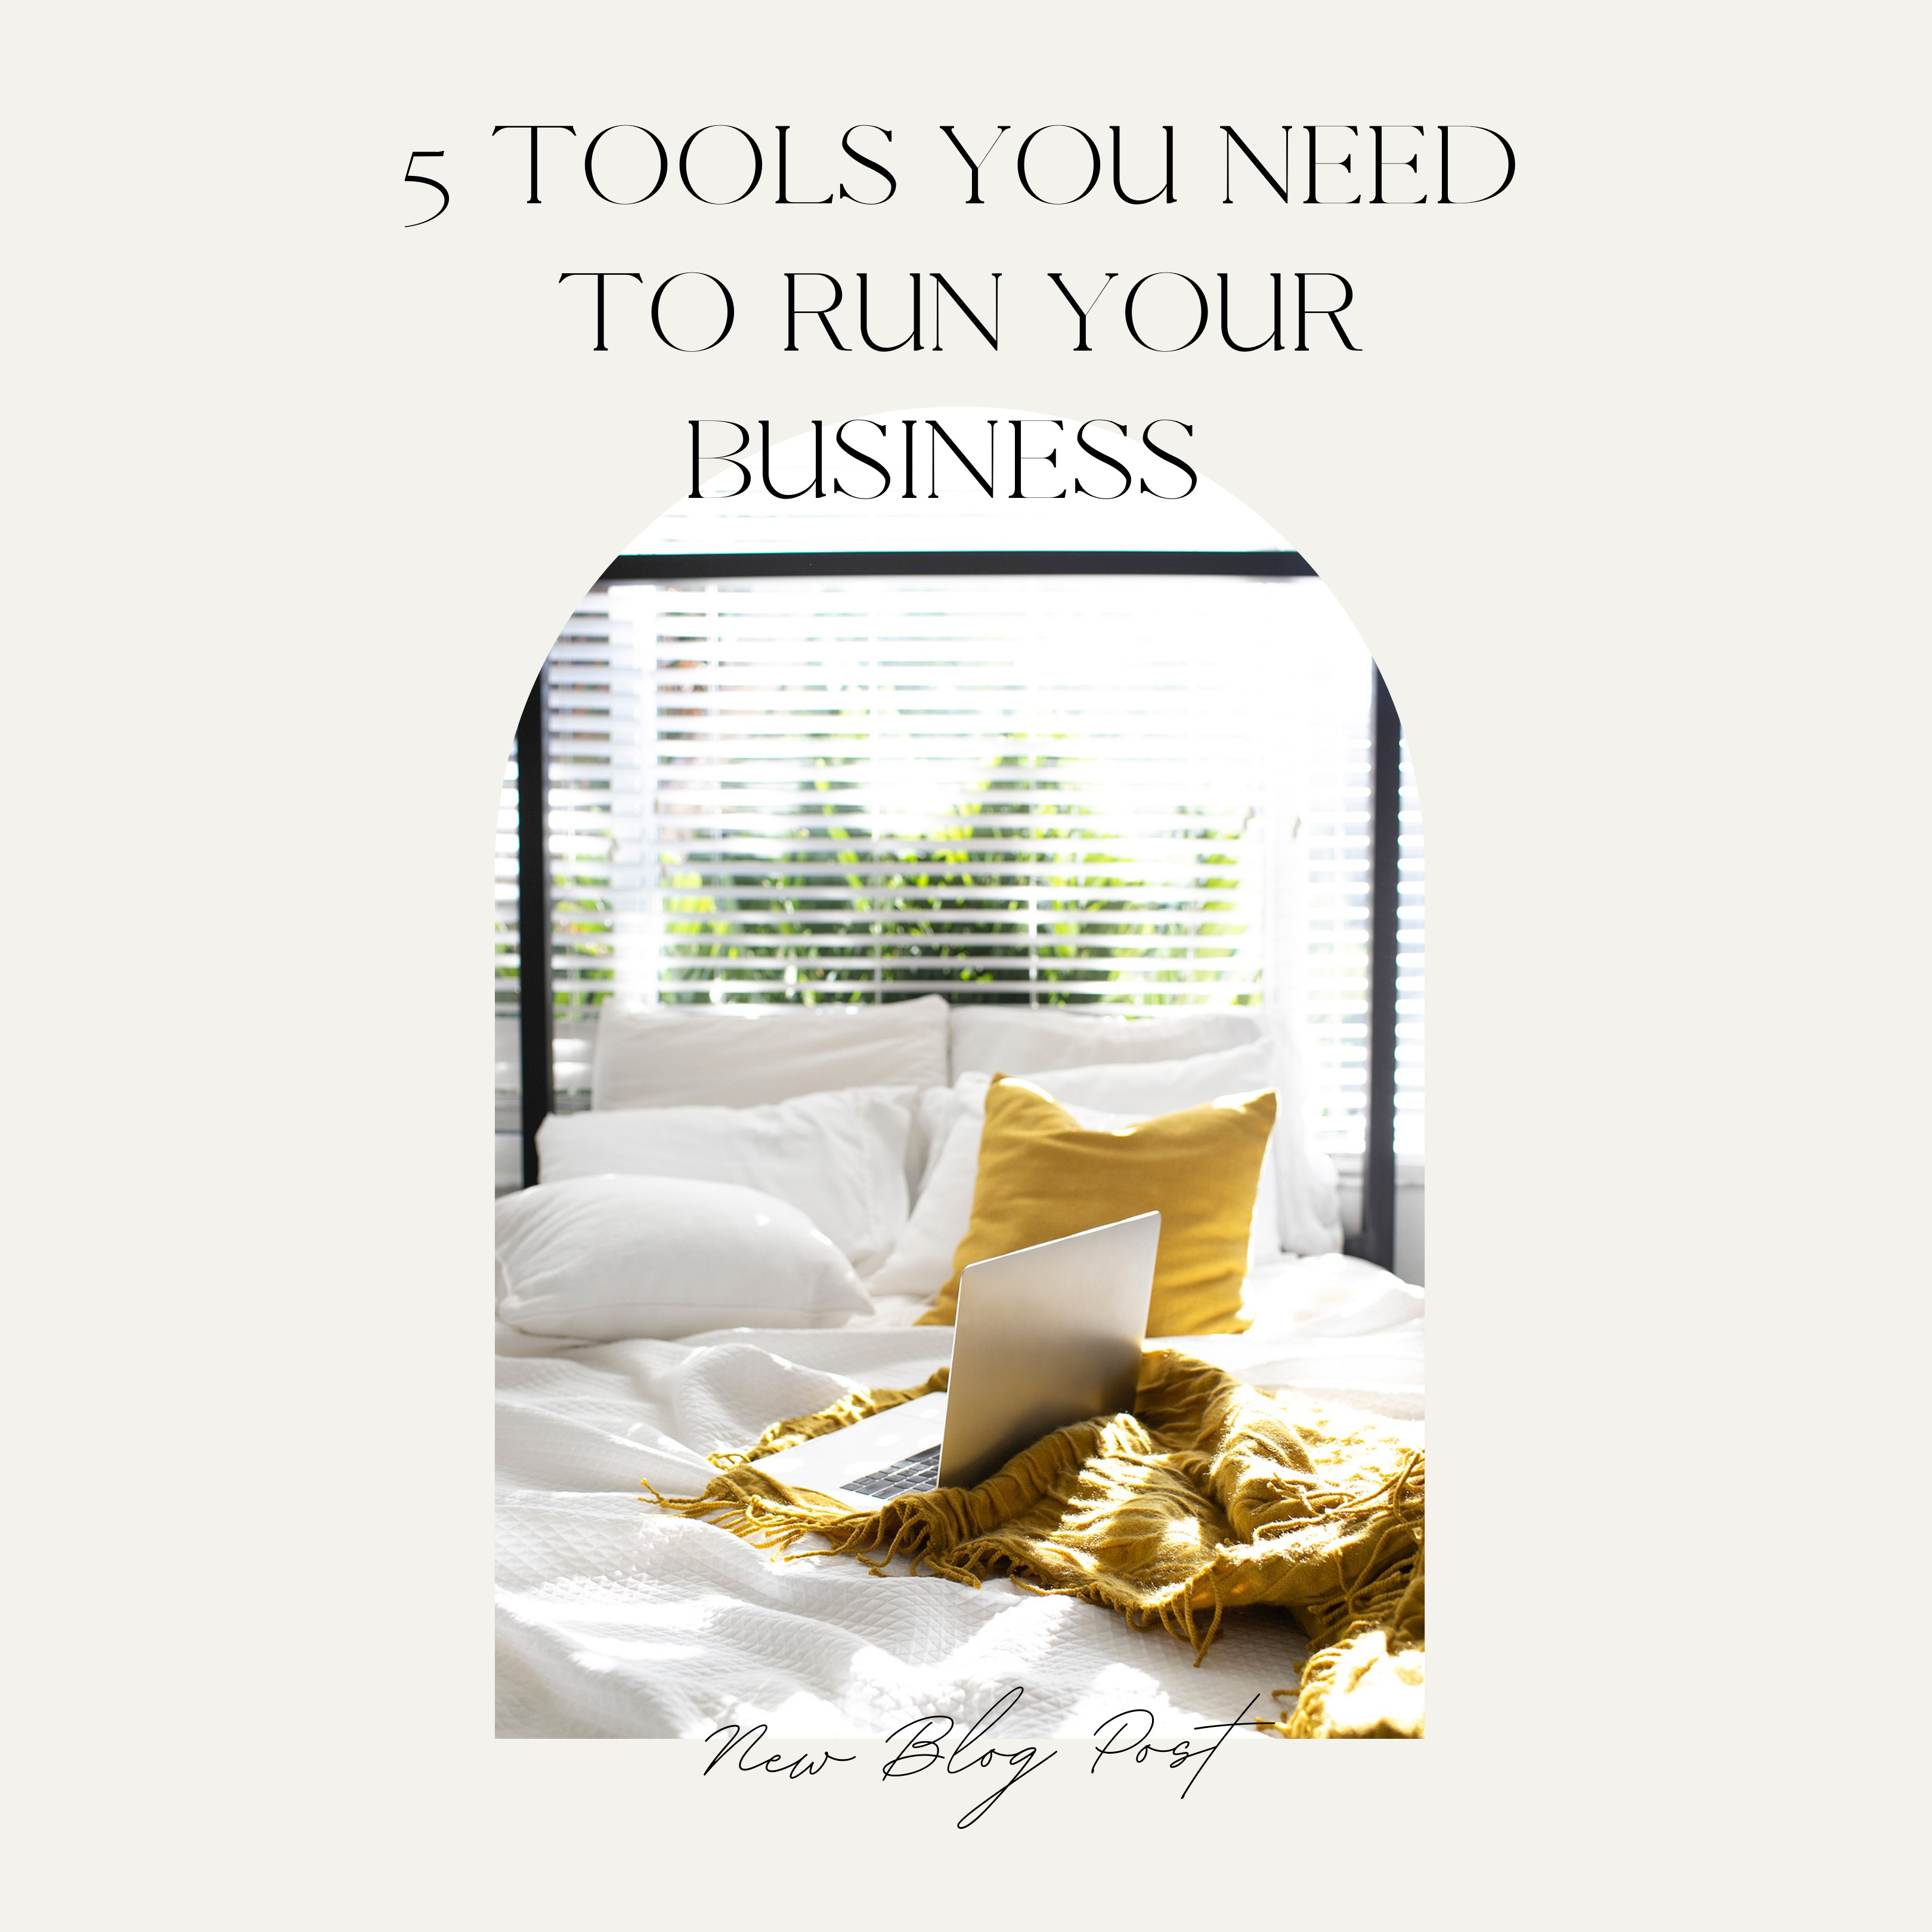 5 Tools You Need To Run Your Business